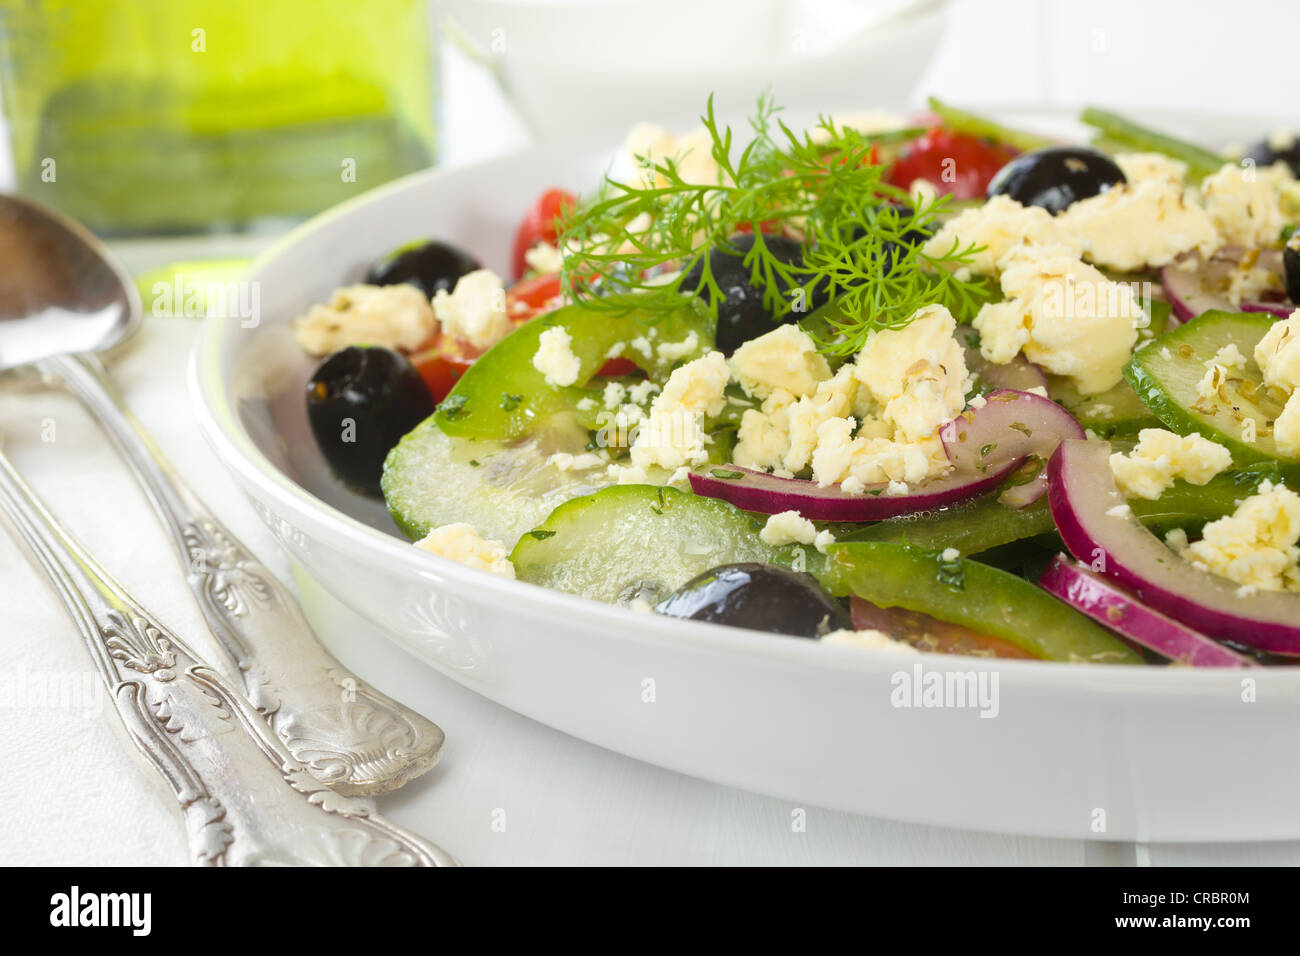 Greek salad, a delicious combination of green capsicum, black olives, cucumber, tomato, red onion, mint, dill and oregano, Stock Photo